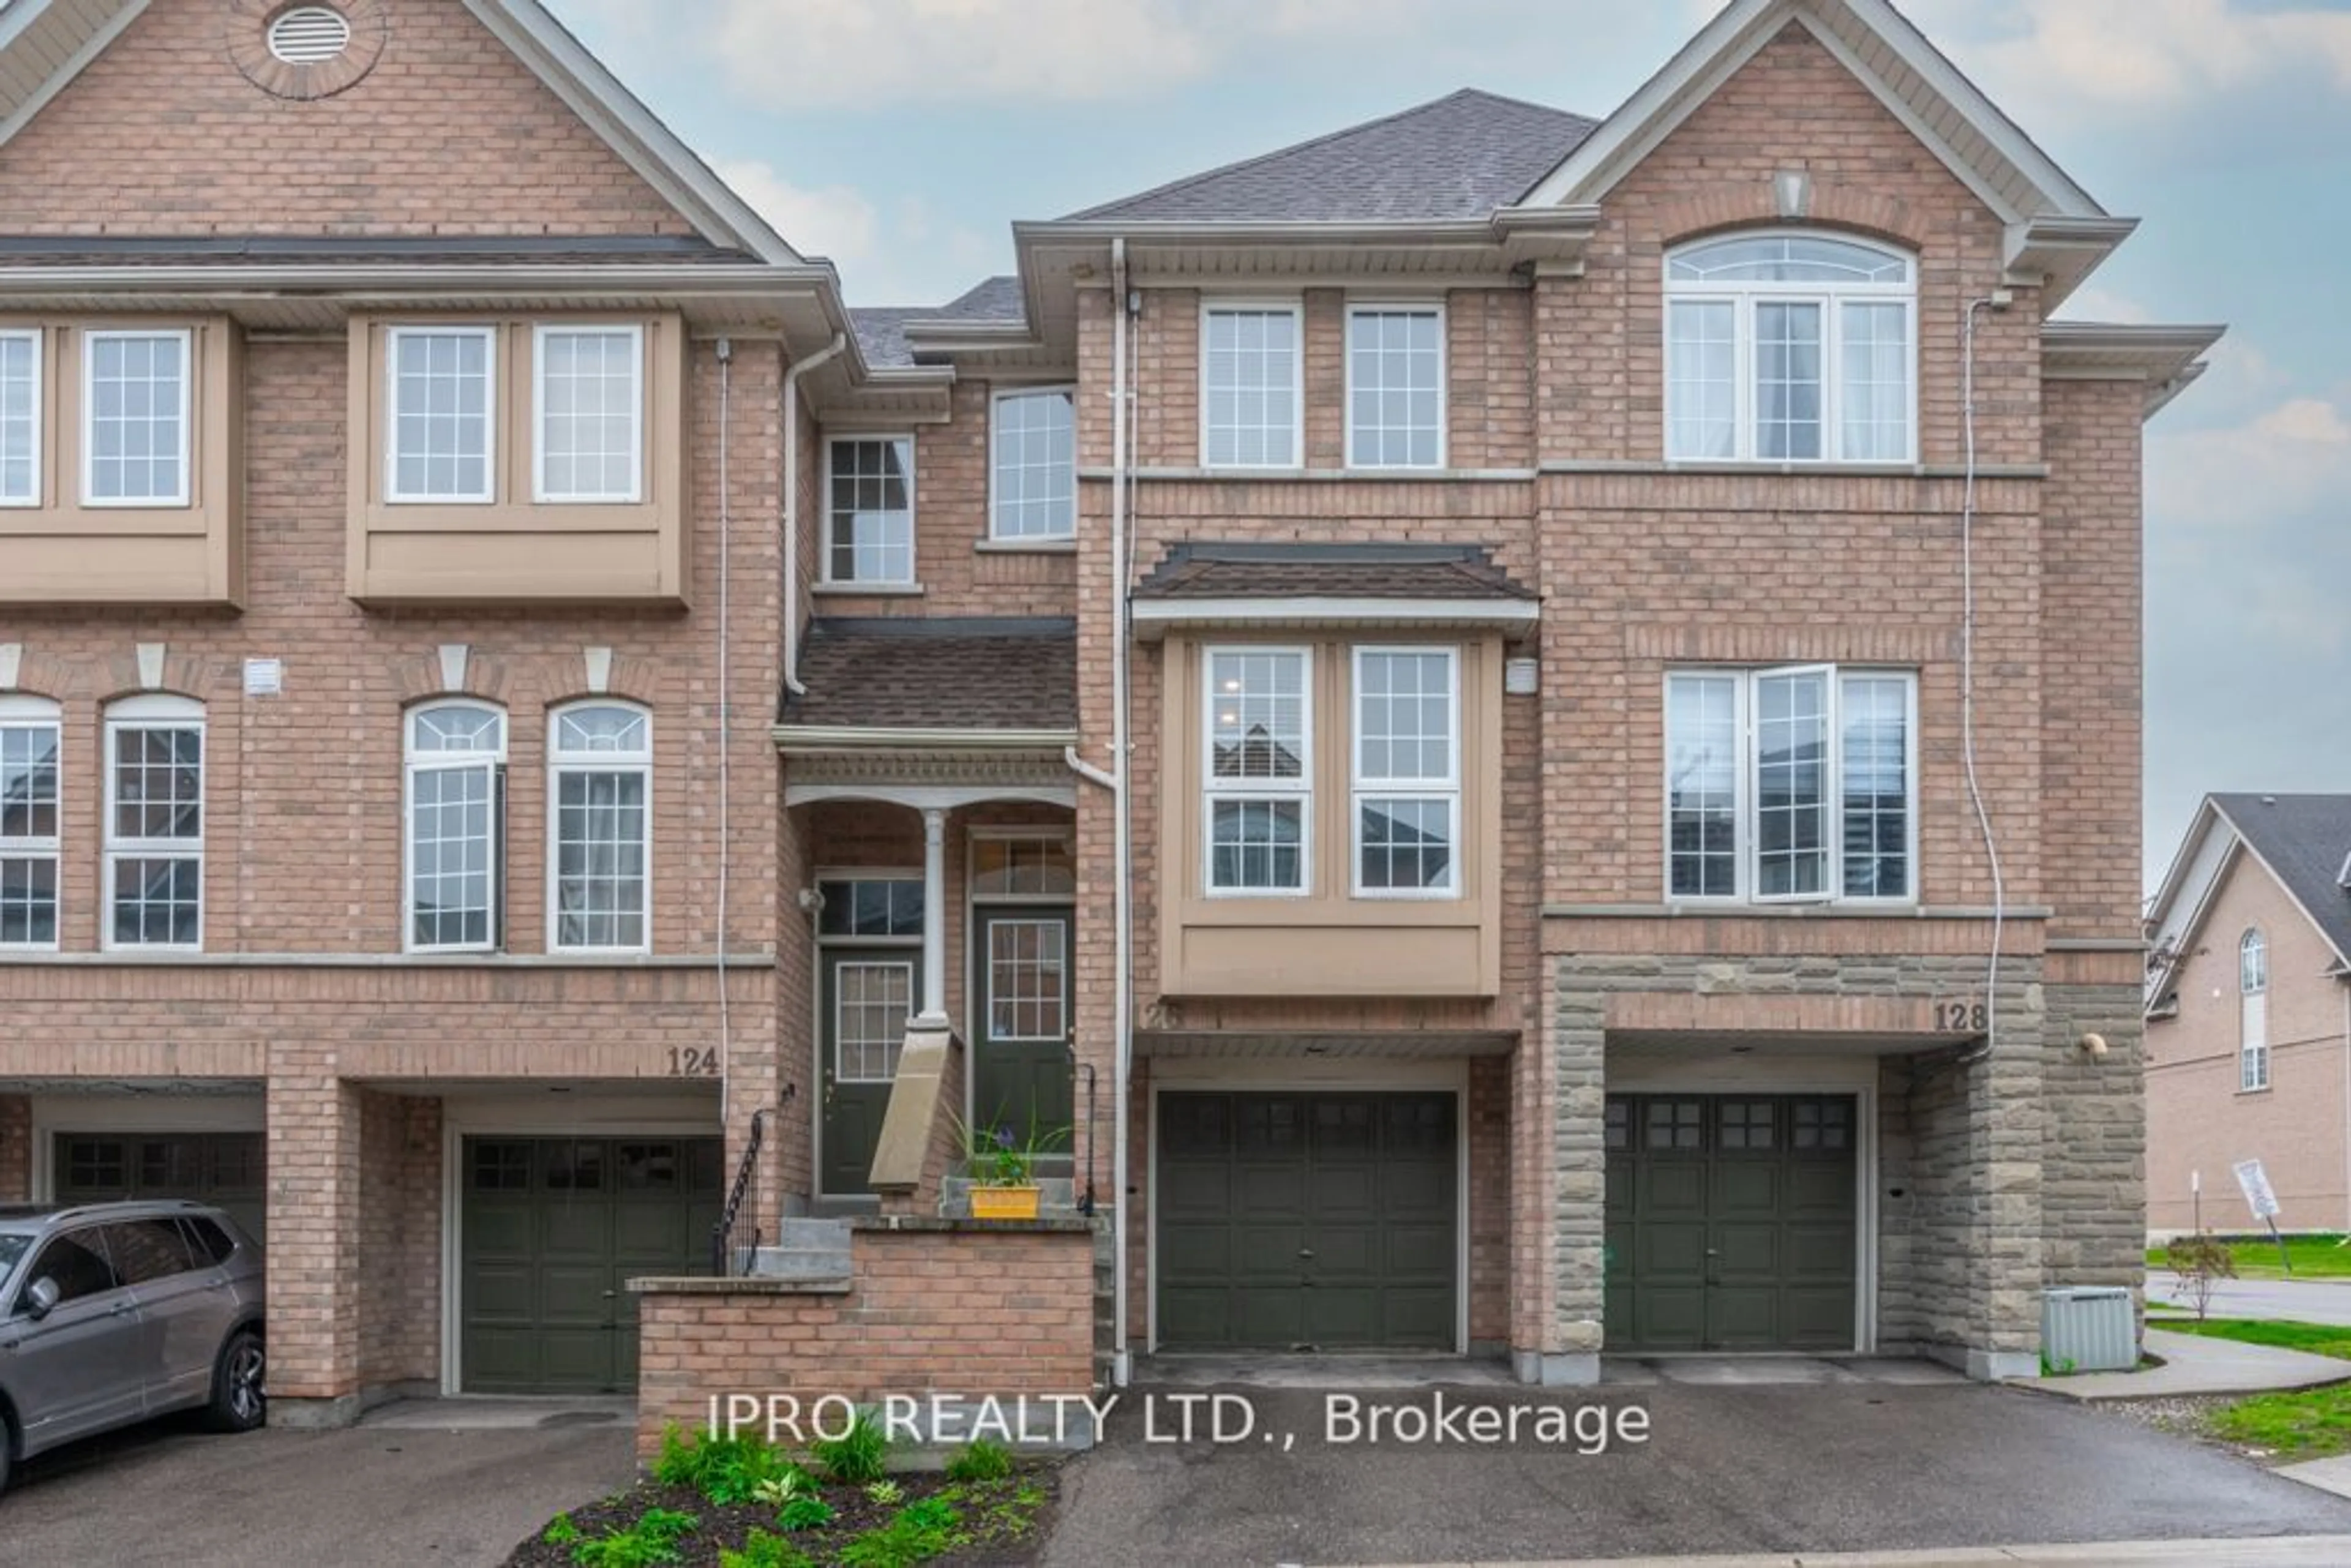 Home with brick exterior material for 50 Strathaven Dr #126, Mississauga Ontario L5R 4E7